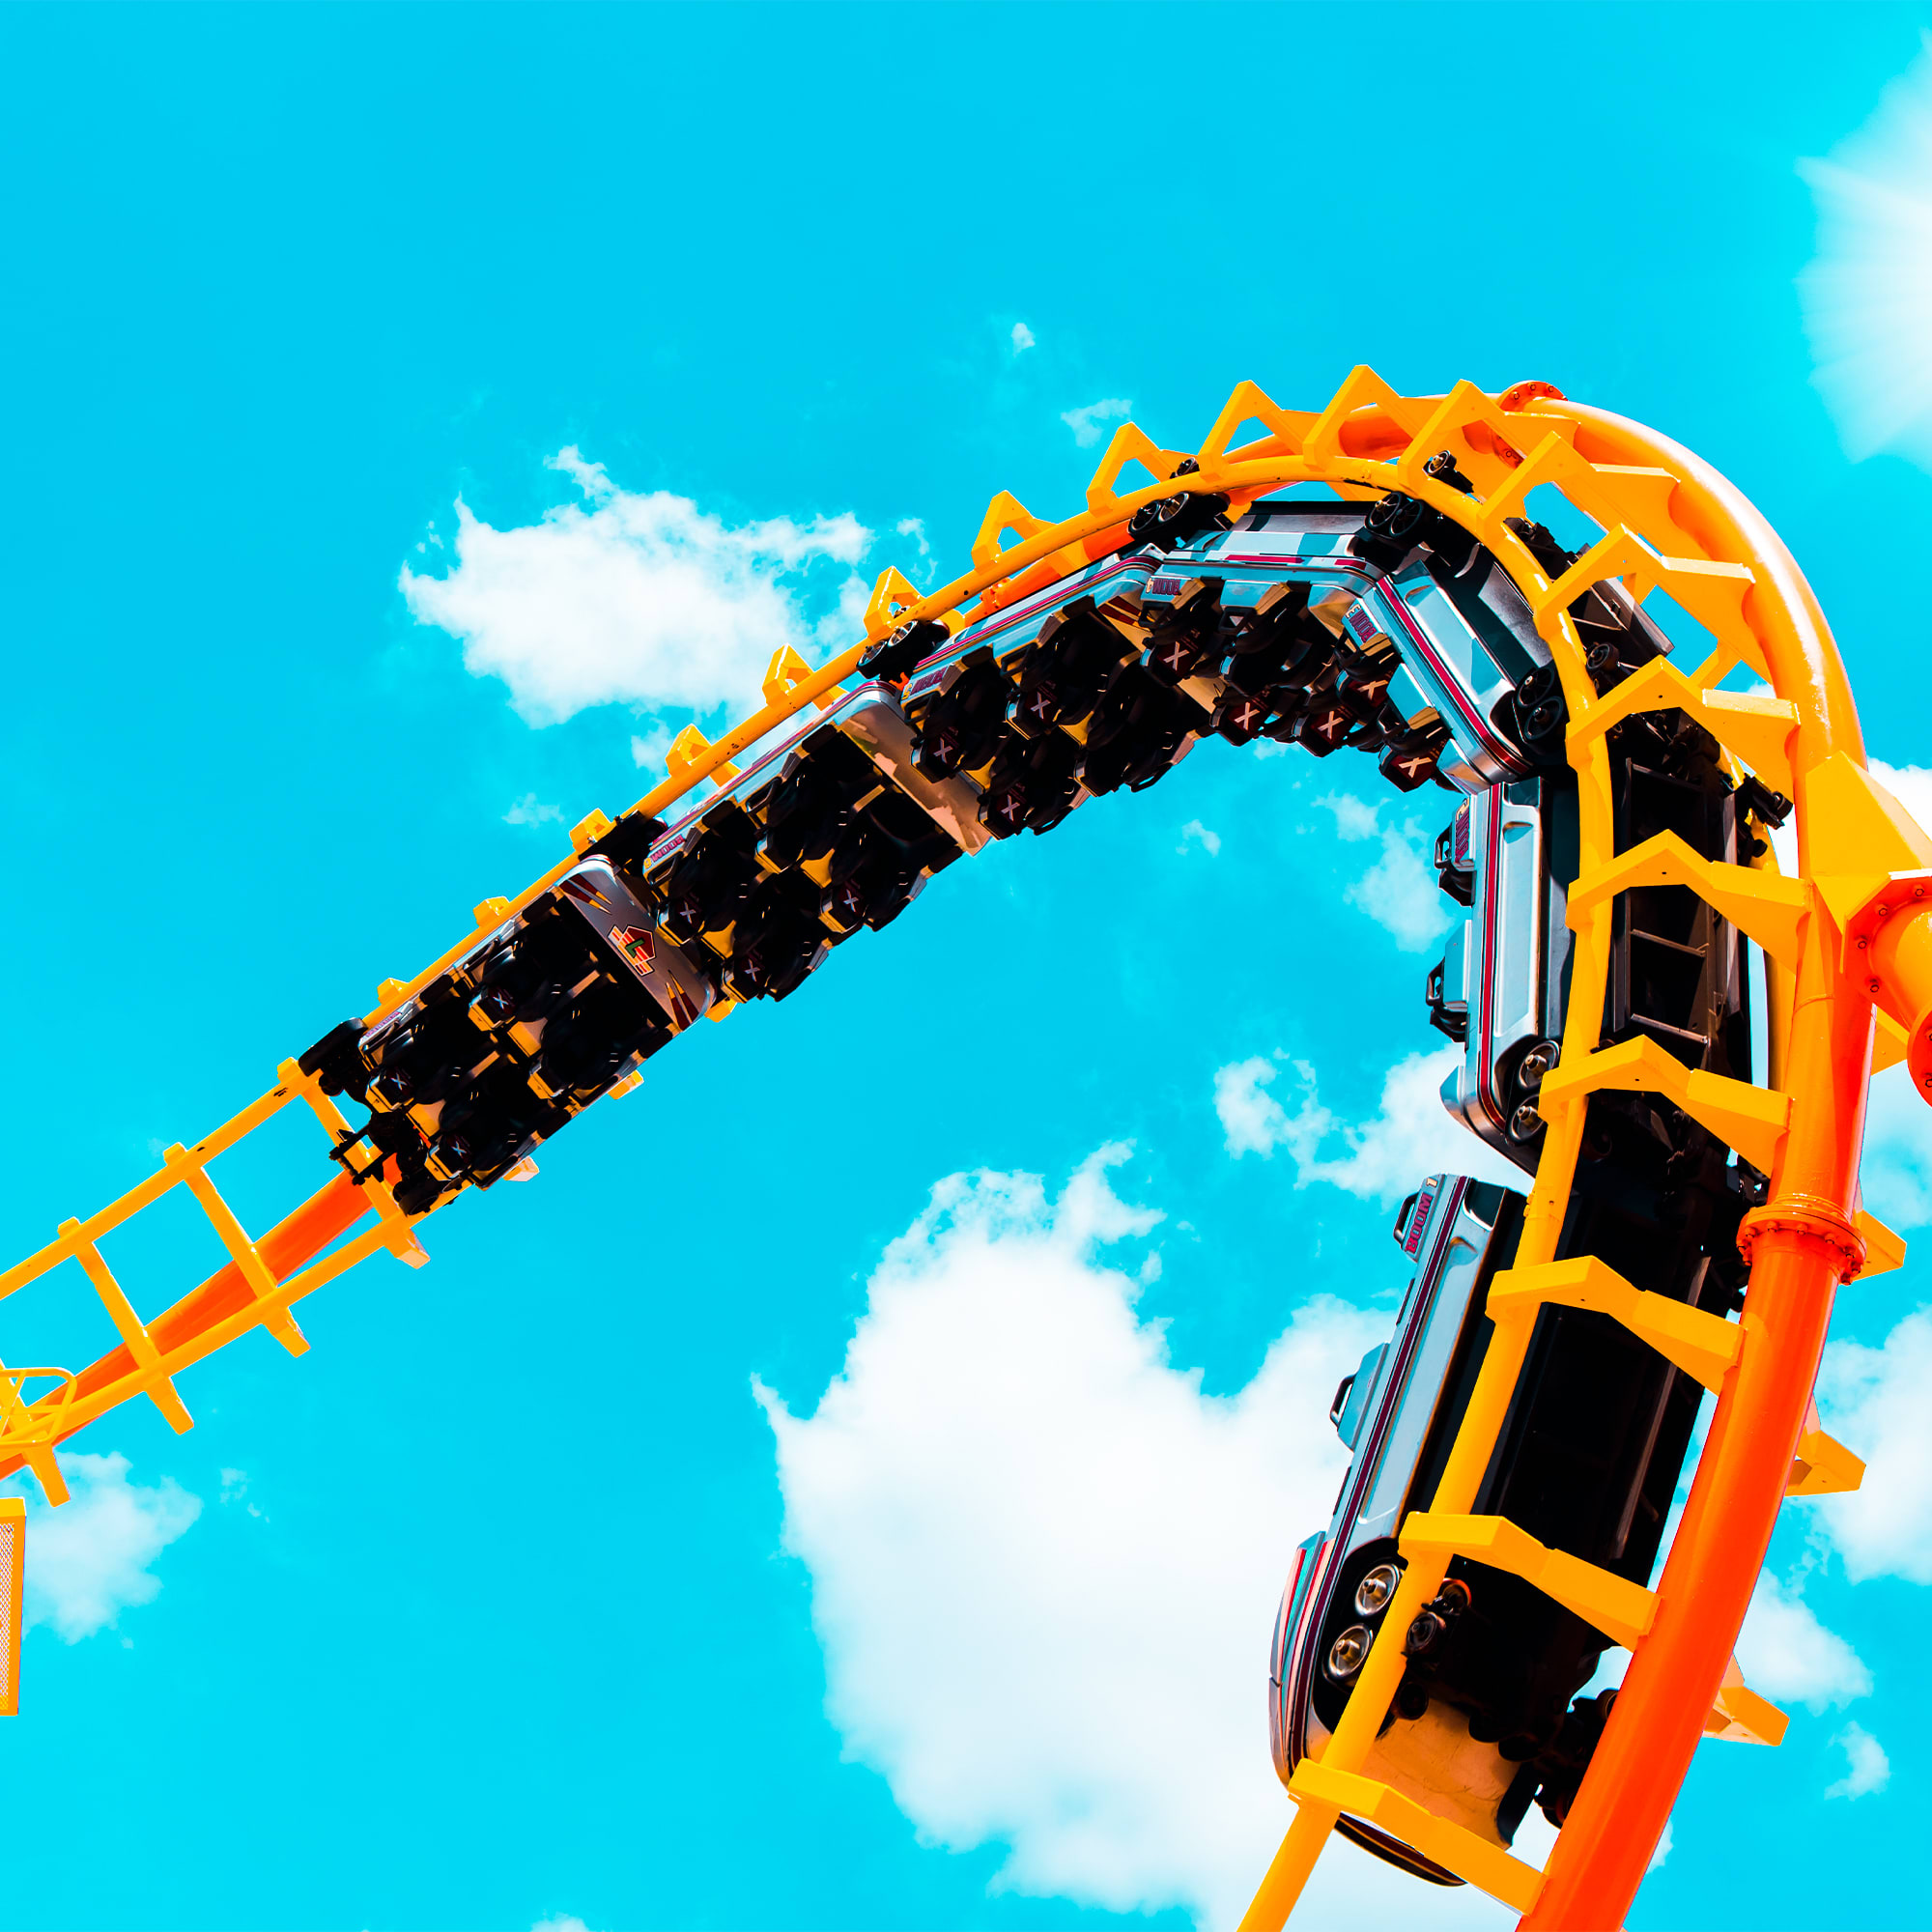 Looking for thrills and excitement? Explore Barcelona's top theme parks and amusement parks for a fun-filled day with family and friends. Experience heart-pumping rides, captivating attractions, and incredible shows - there's never a dull moment!